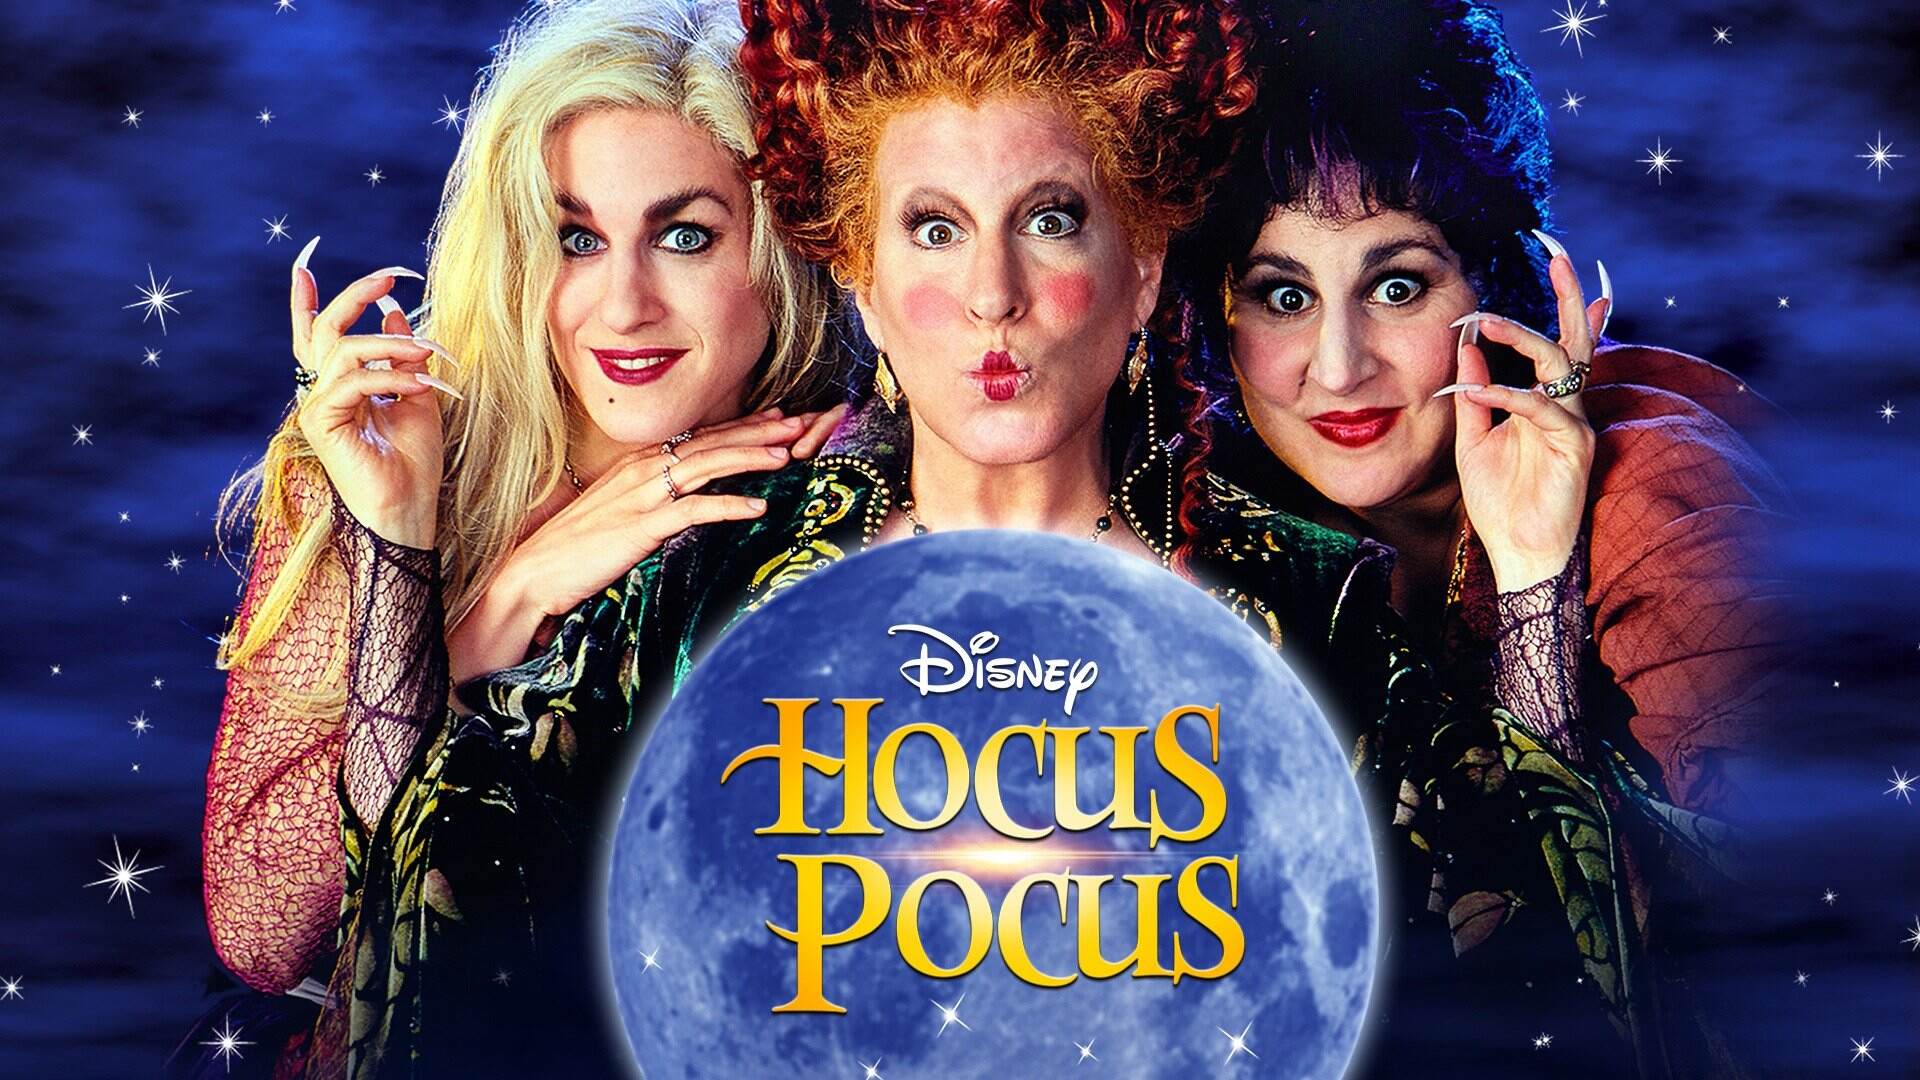 37-facts-about-the-movie-hocus-pocus